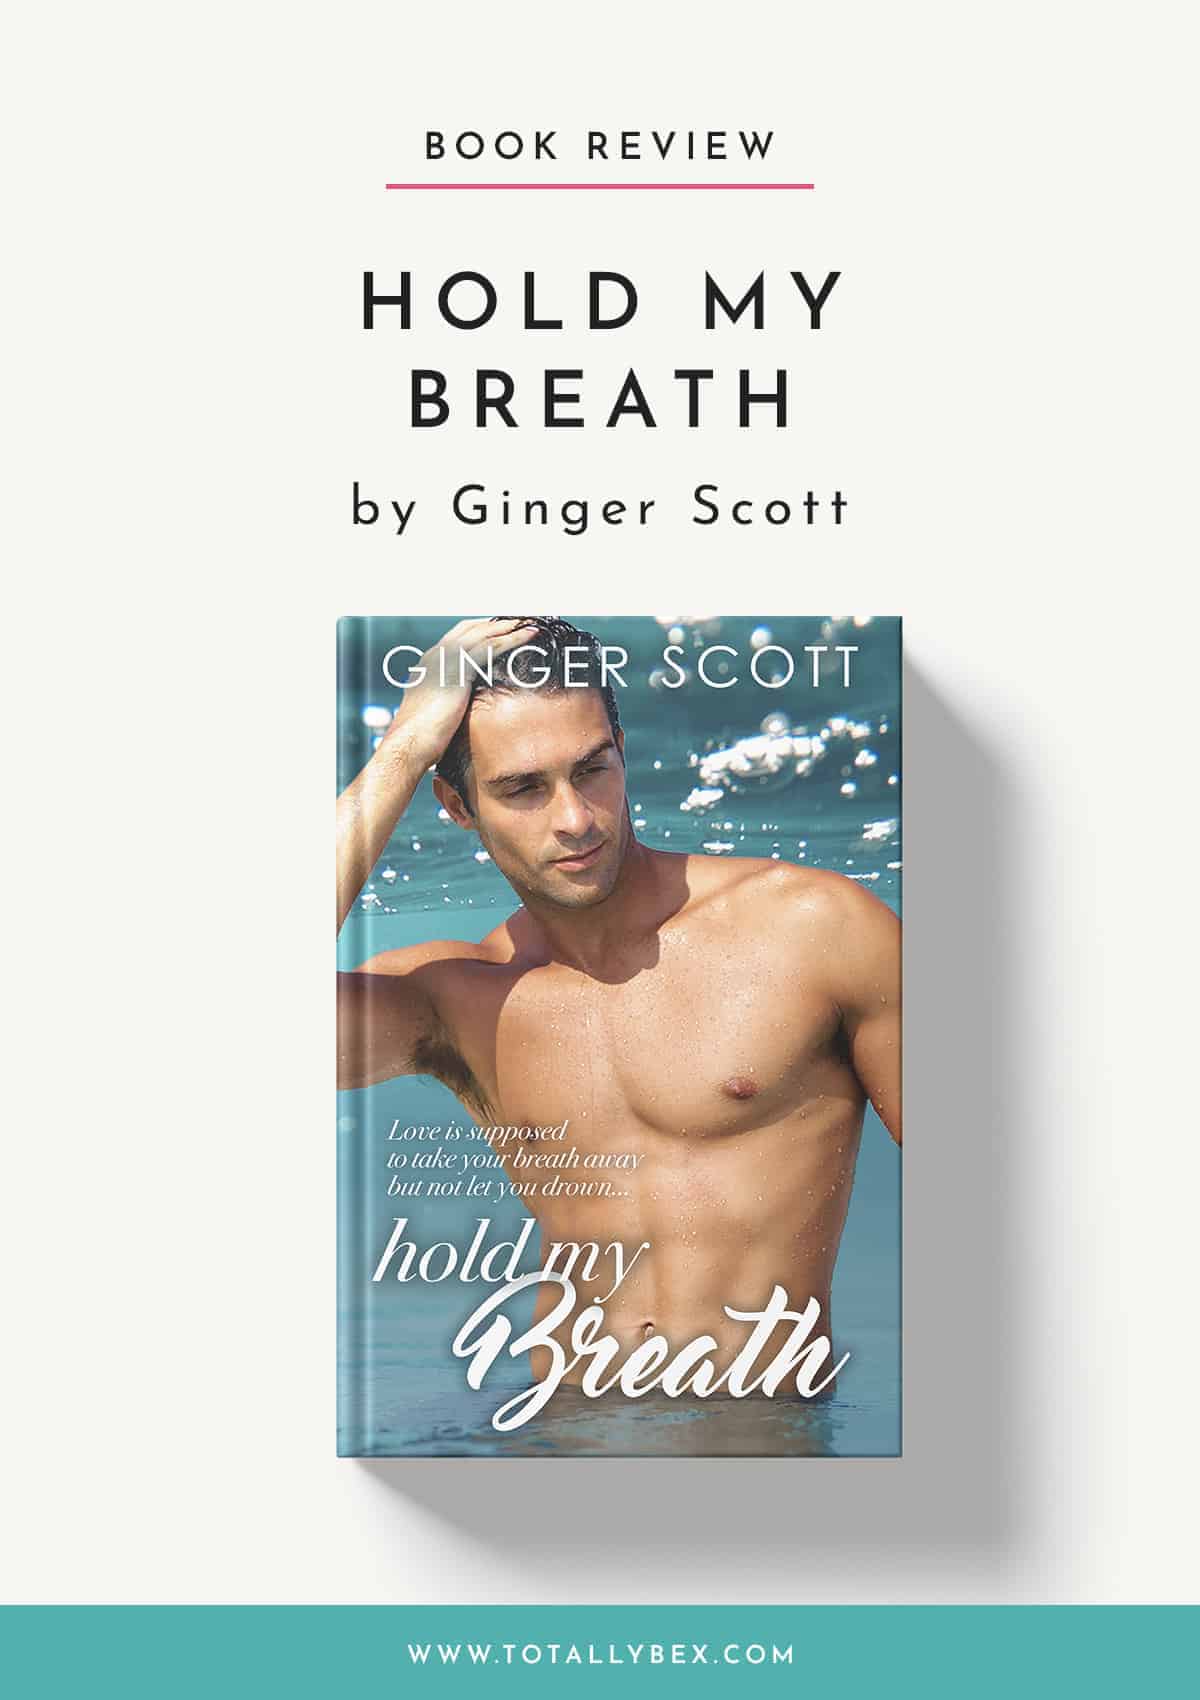 Hold My Breath by Ginger Scott – Emotional and Inspirational